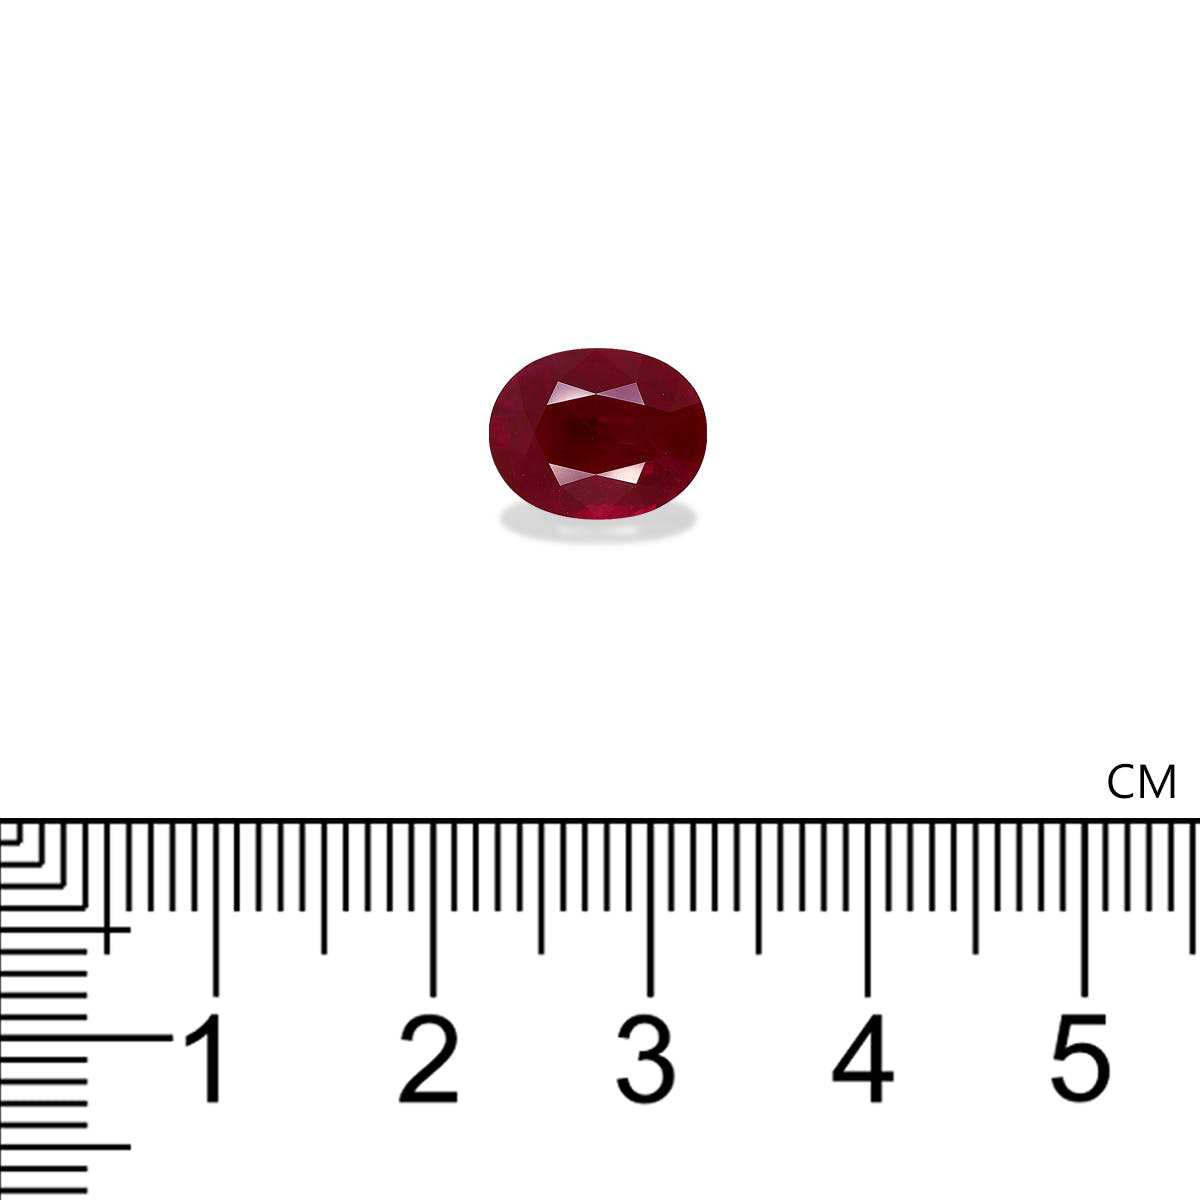 Picture of Red Burma Ruby 3.67ct (WC1103-13)